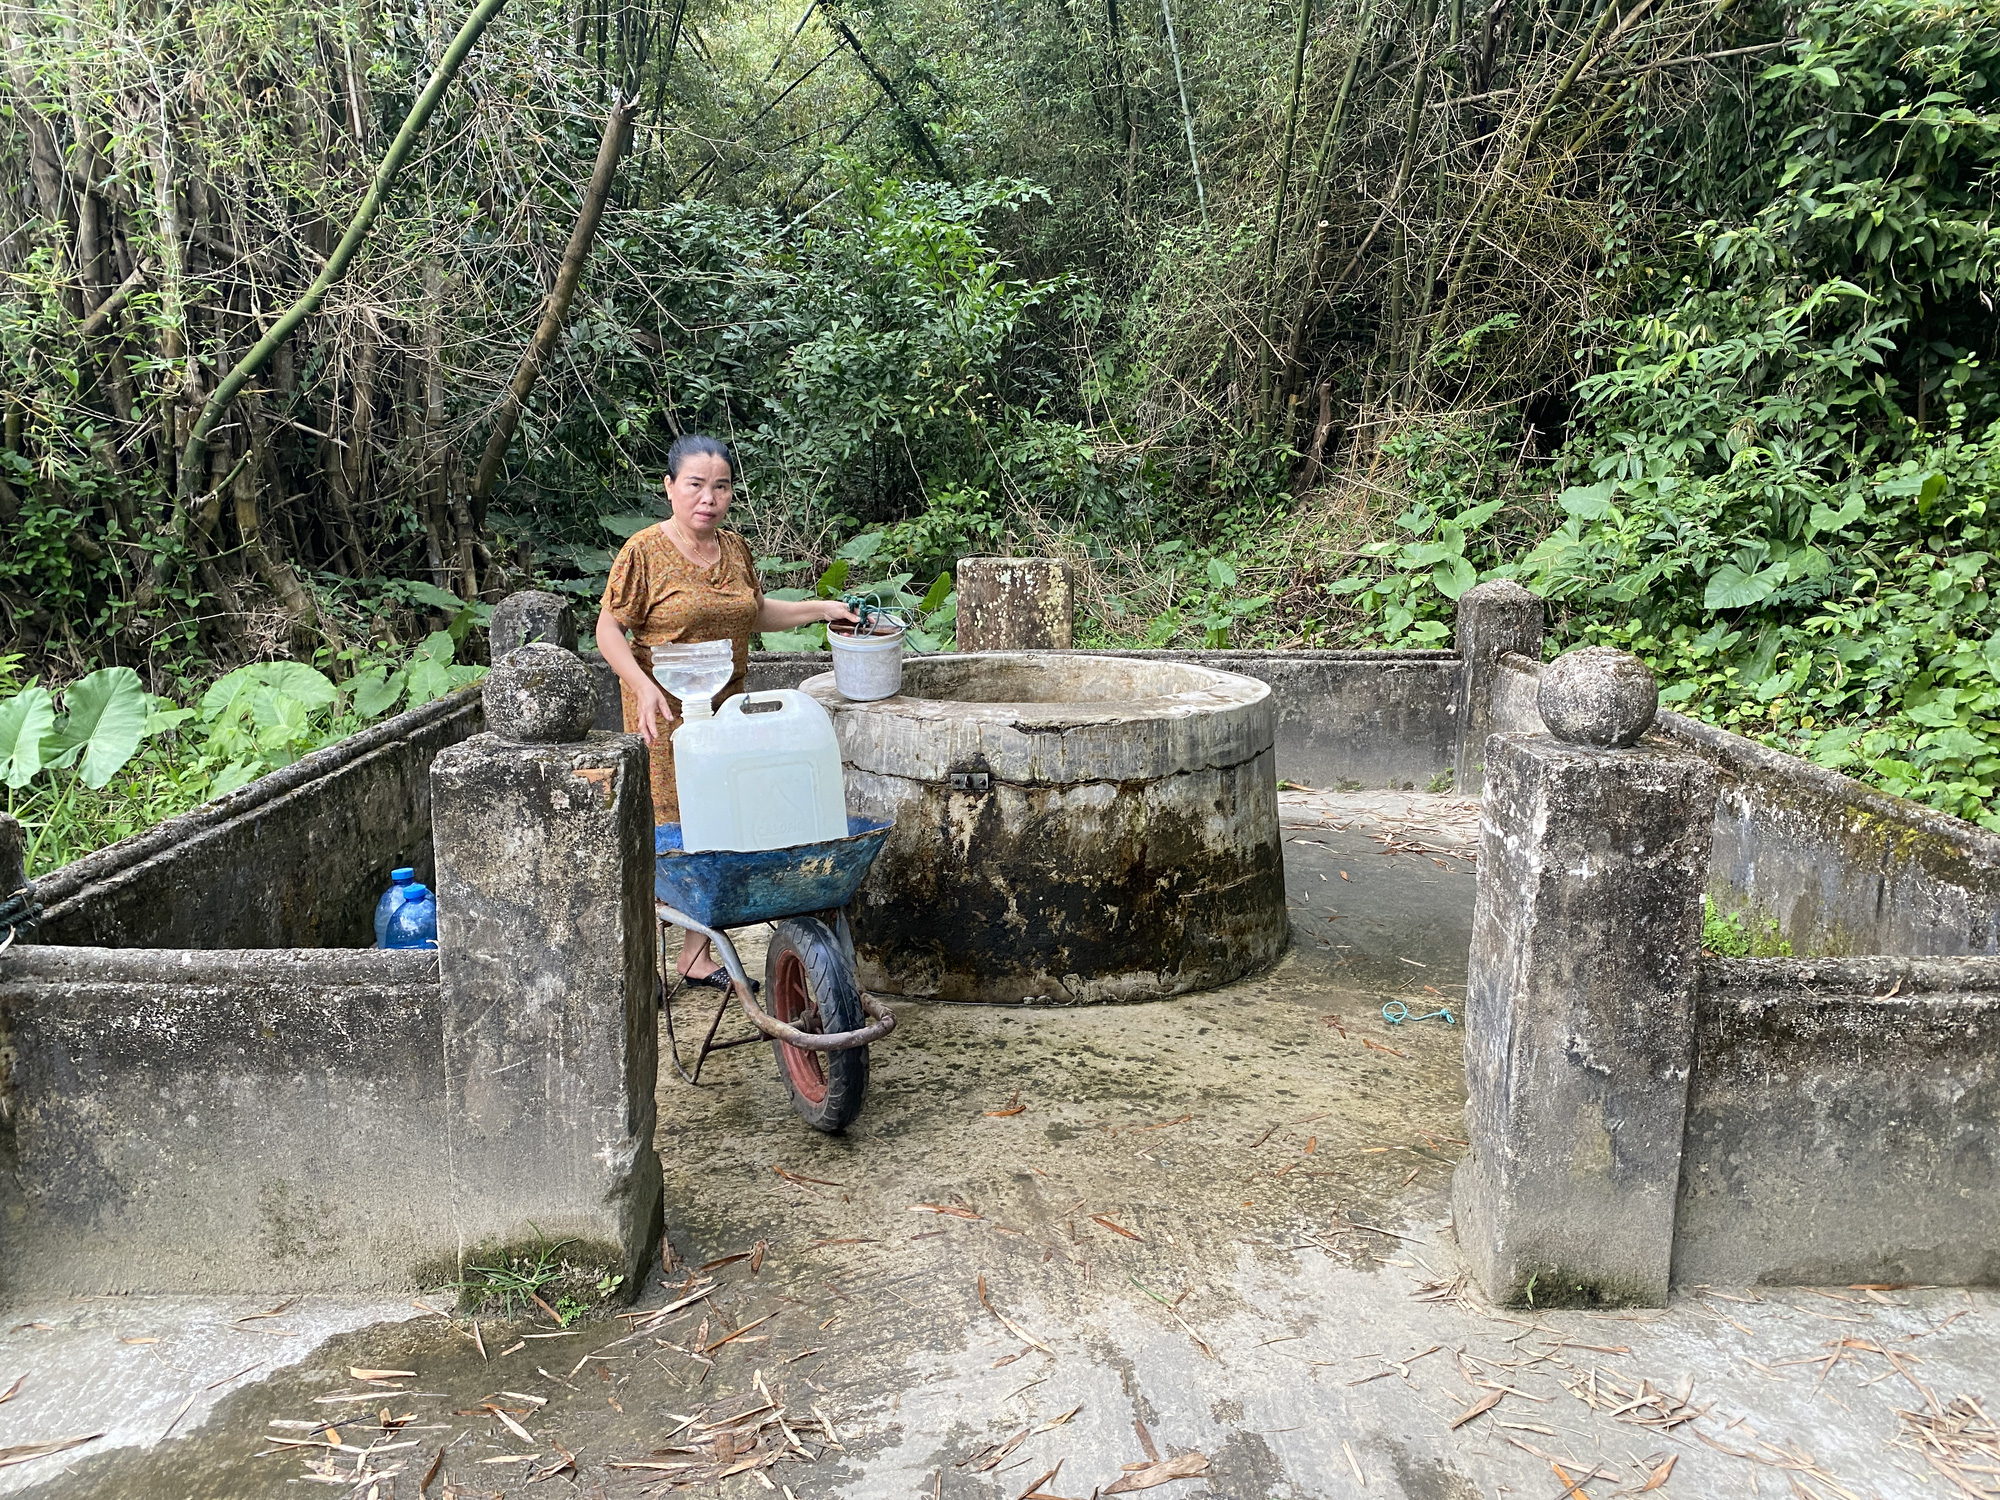 A woman draws water from an ancient well facing south Tam Hai Island Commune, off Nui Thanh District in Quang Nam Province, central Vietnam. Photo: B.D. / Tuoi Tre